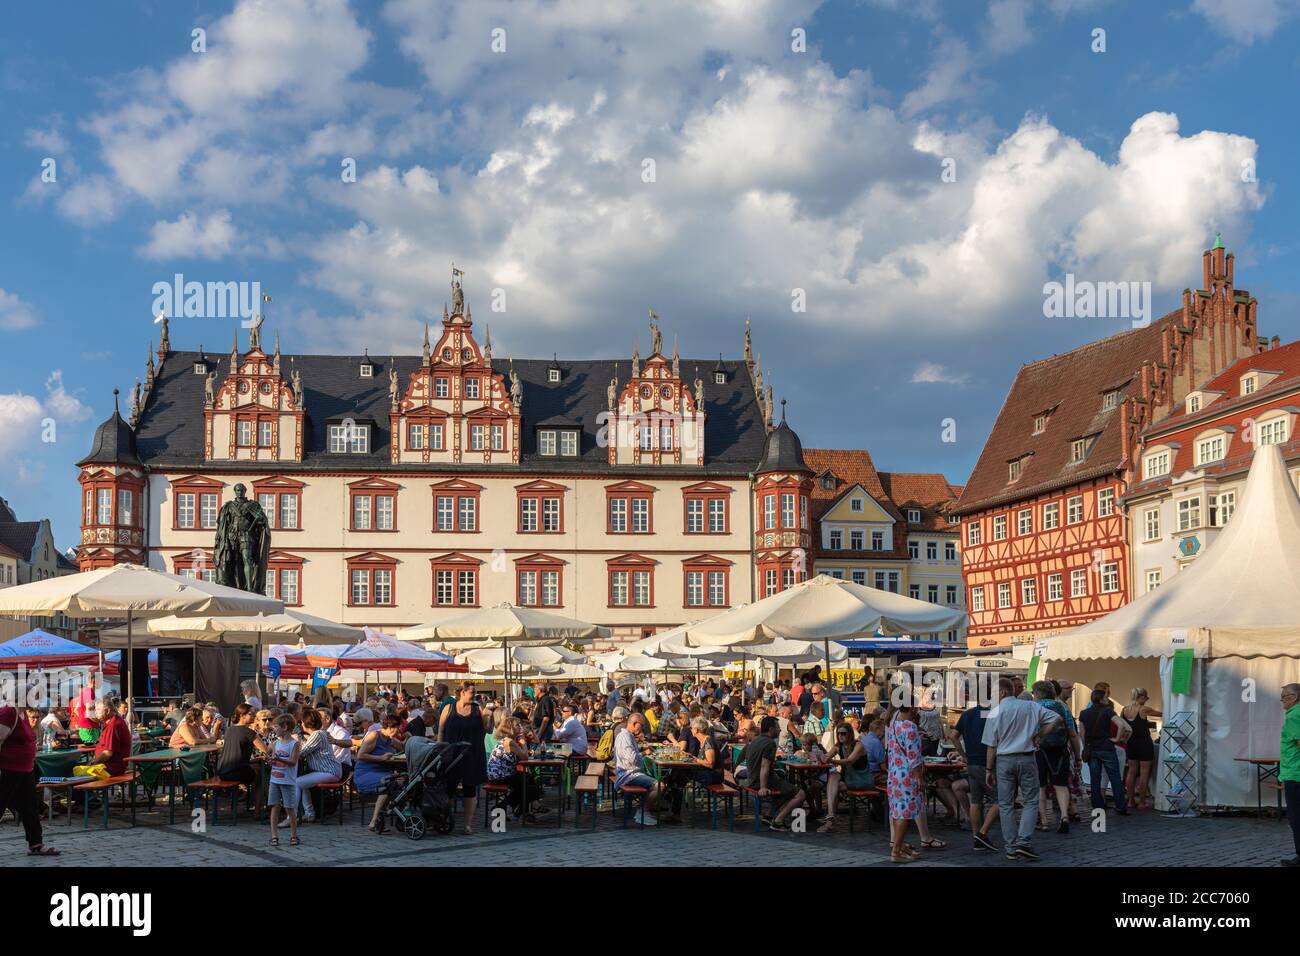 Coburg, Germany - August 31, 2019 -  Beer festival on the Marktplatz (market square) in the center of old town of Coburg in Bavaria, Germany Stock Photo